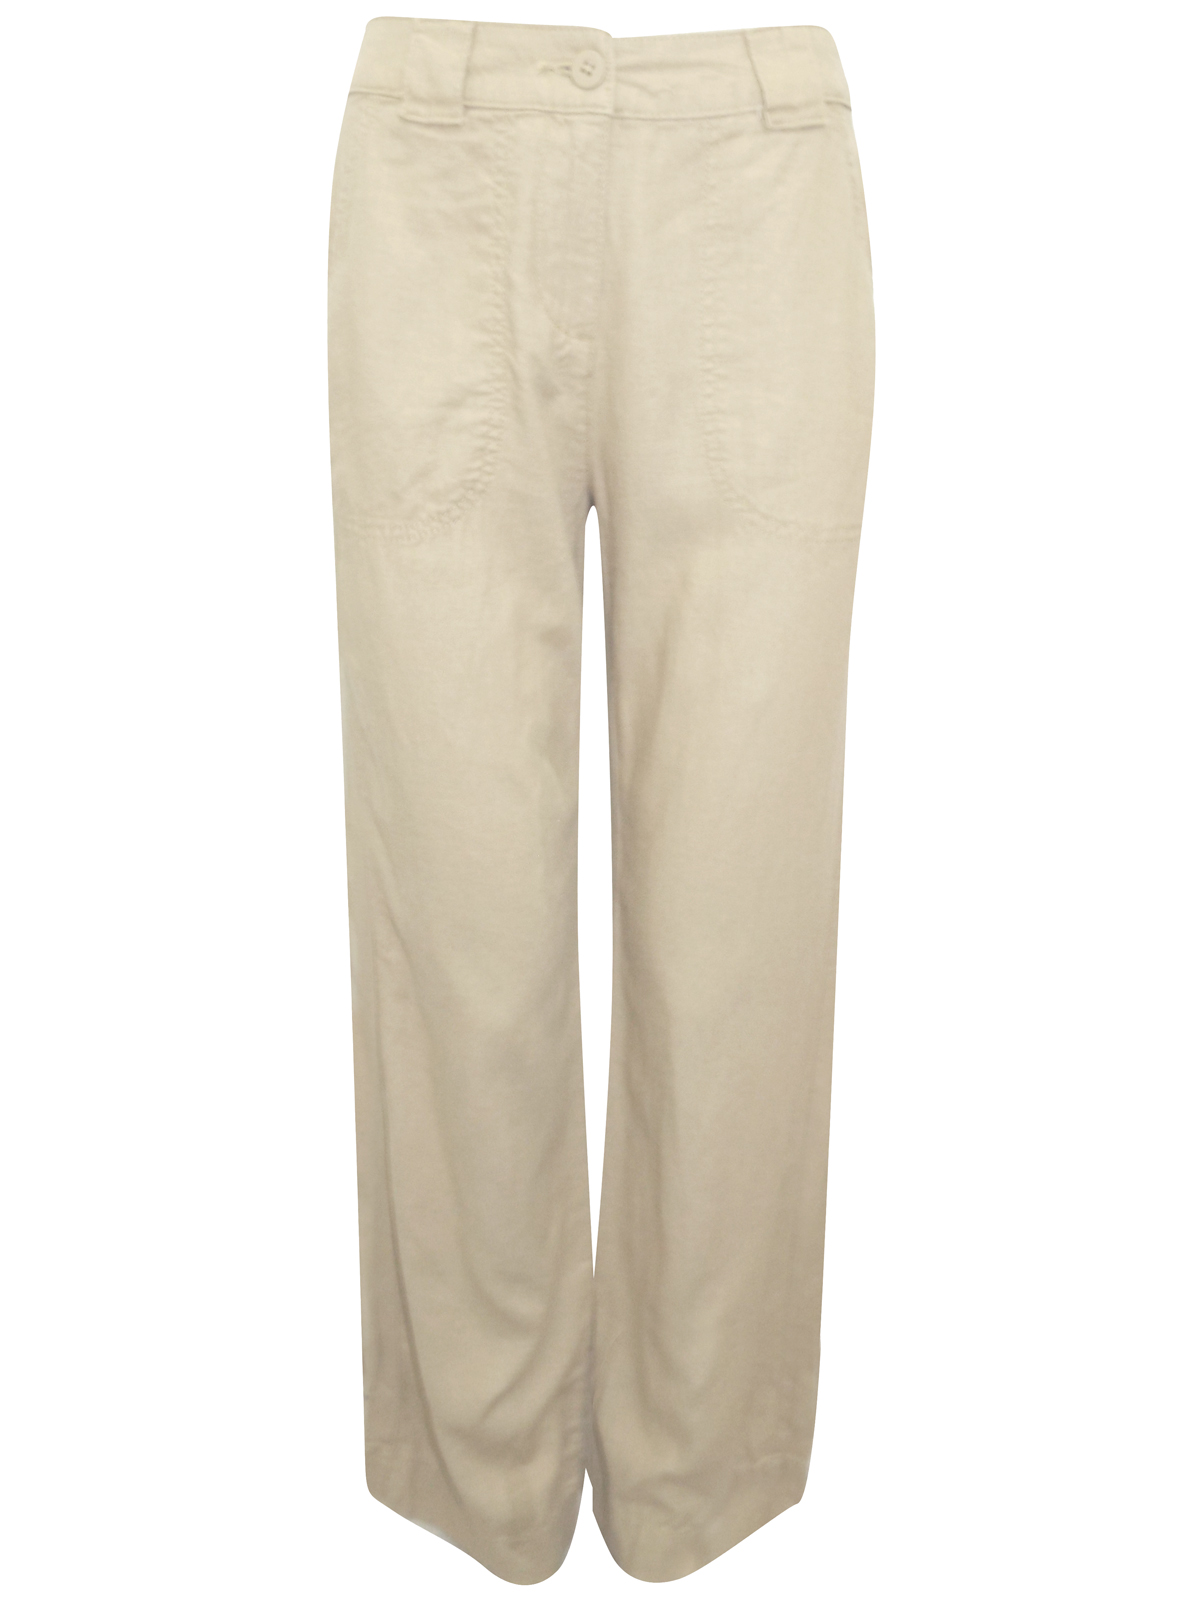 Marks and Spencer - - M&5 CAMEL Linen Blend Wide Leg Trousers - Size 8 ...